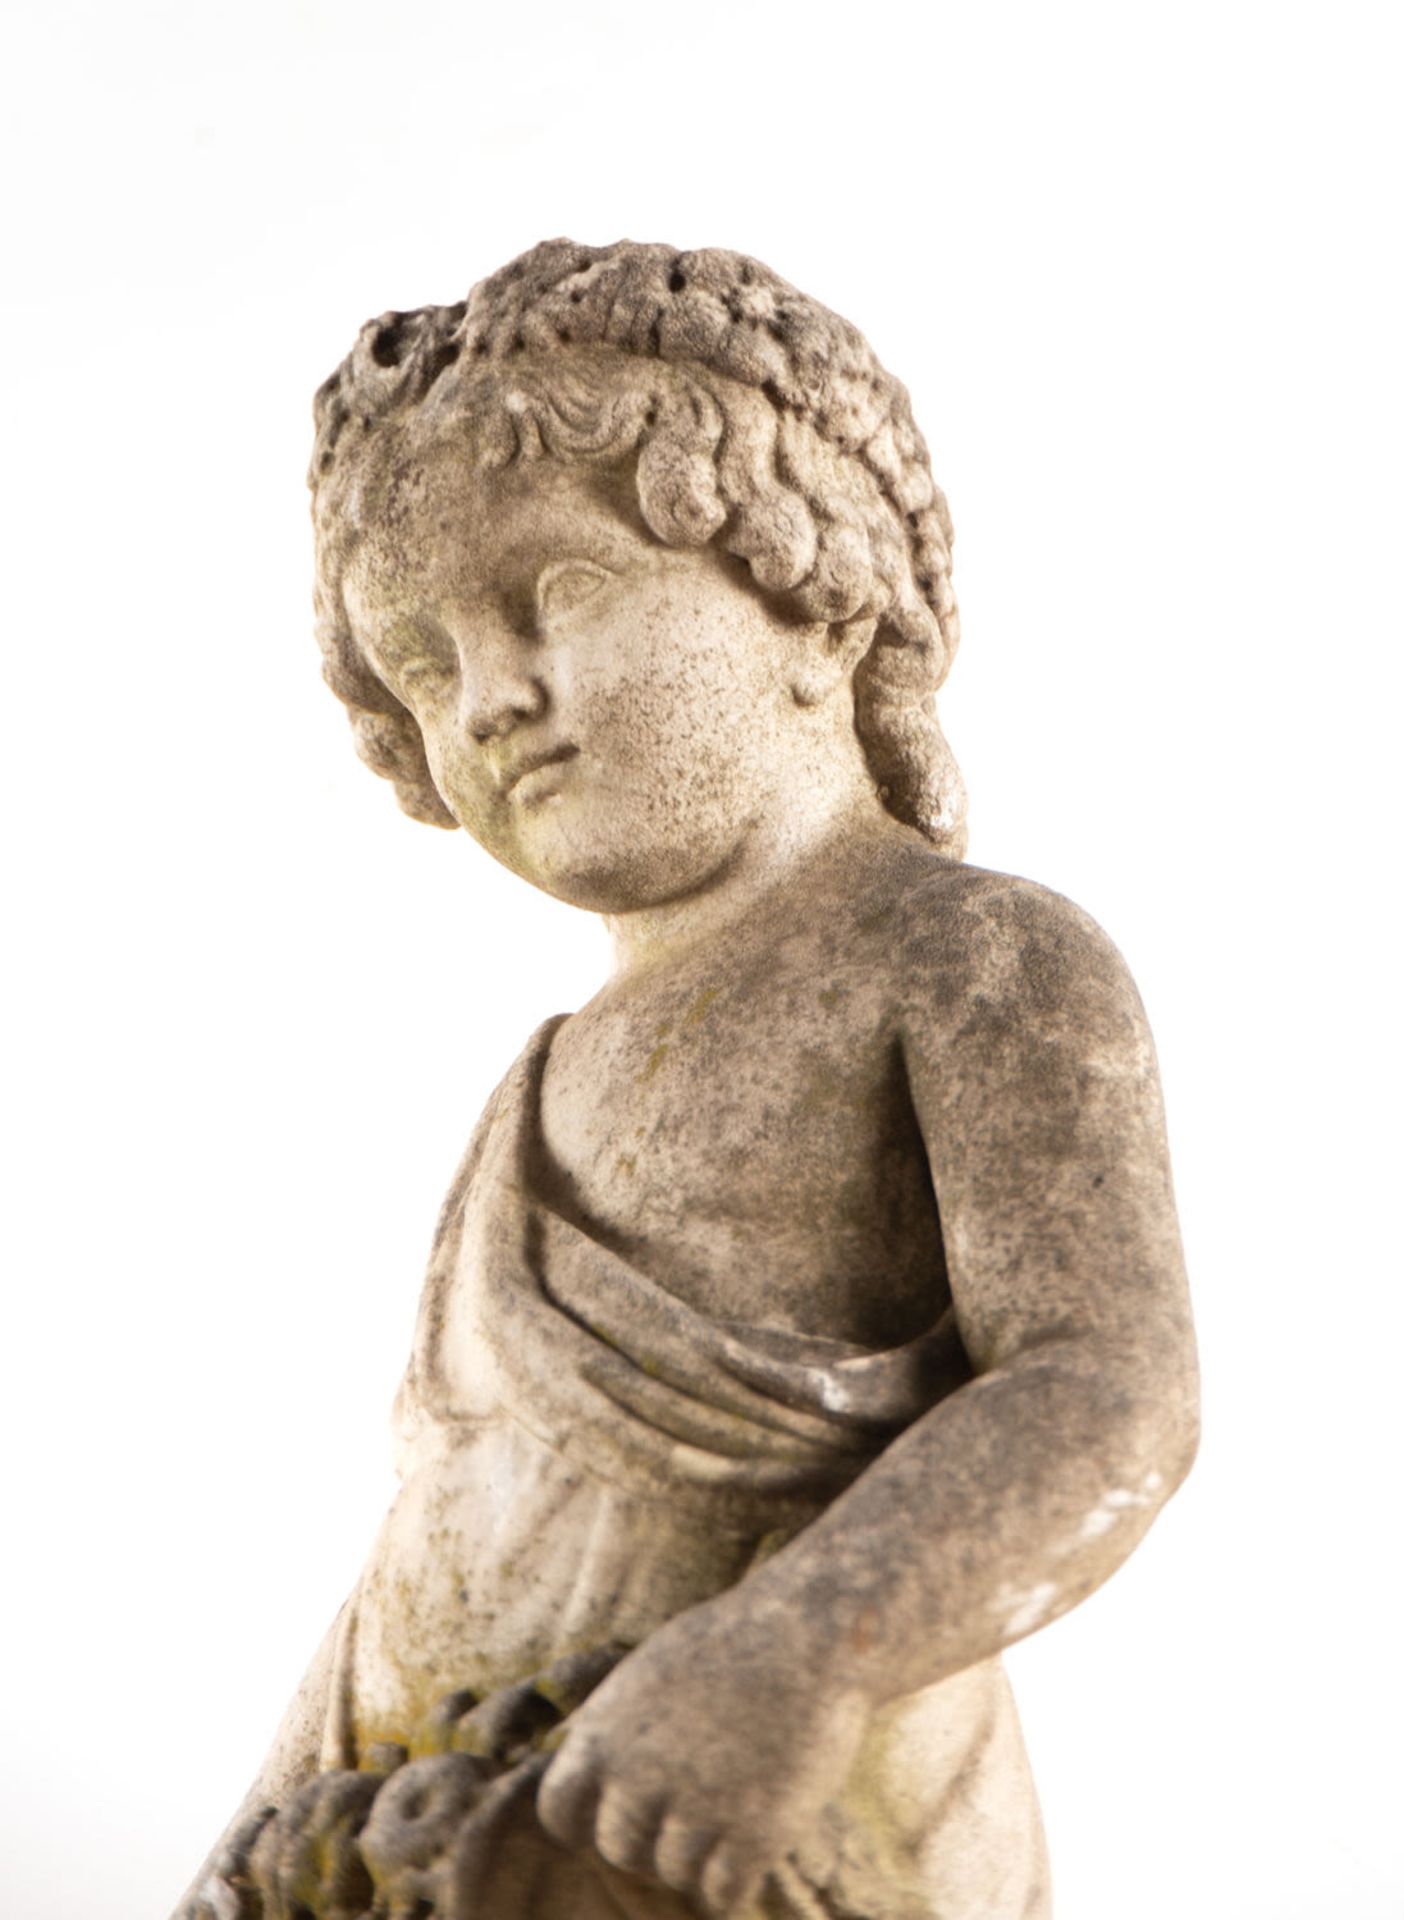 Large Cherub Figure in Marble, France, 18th century - Image 13 of 14